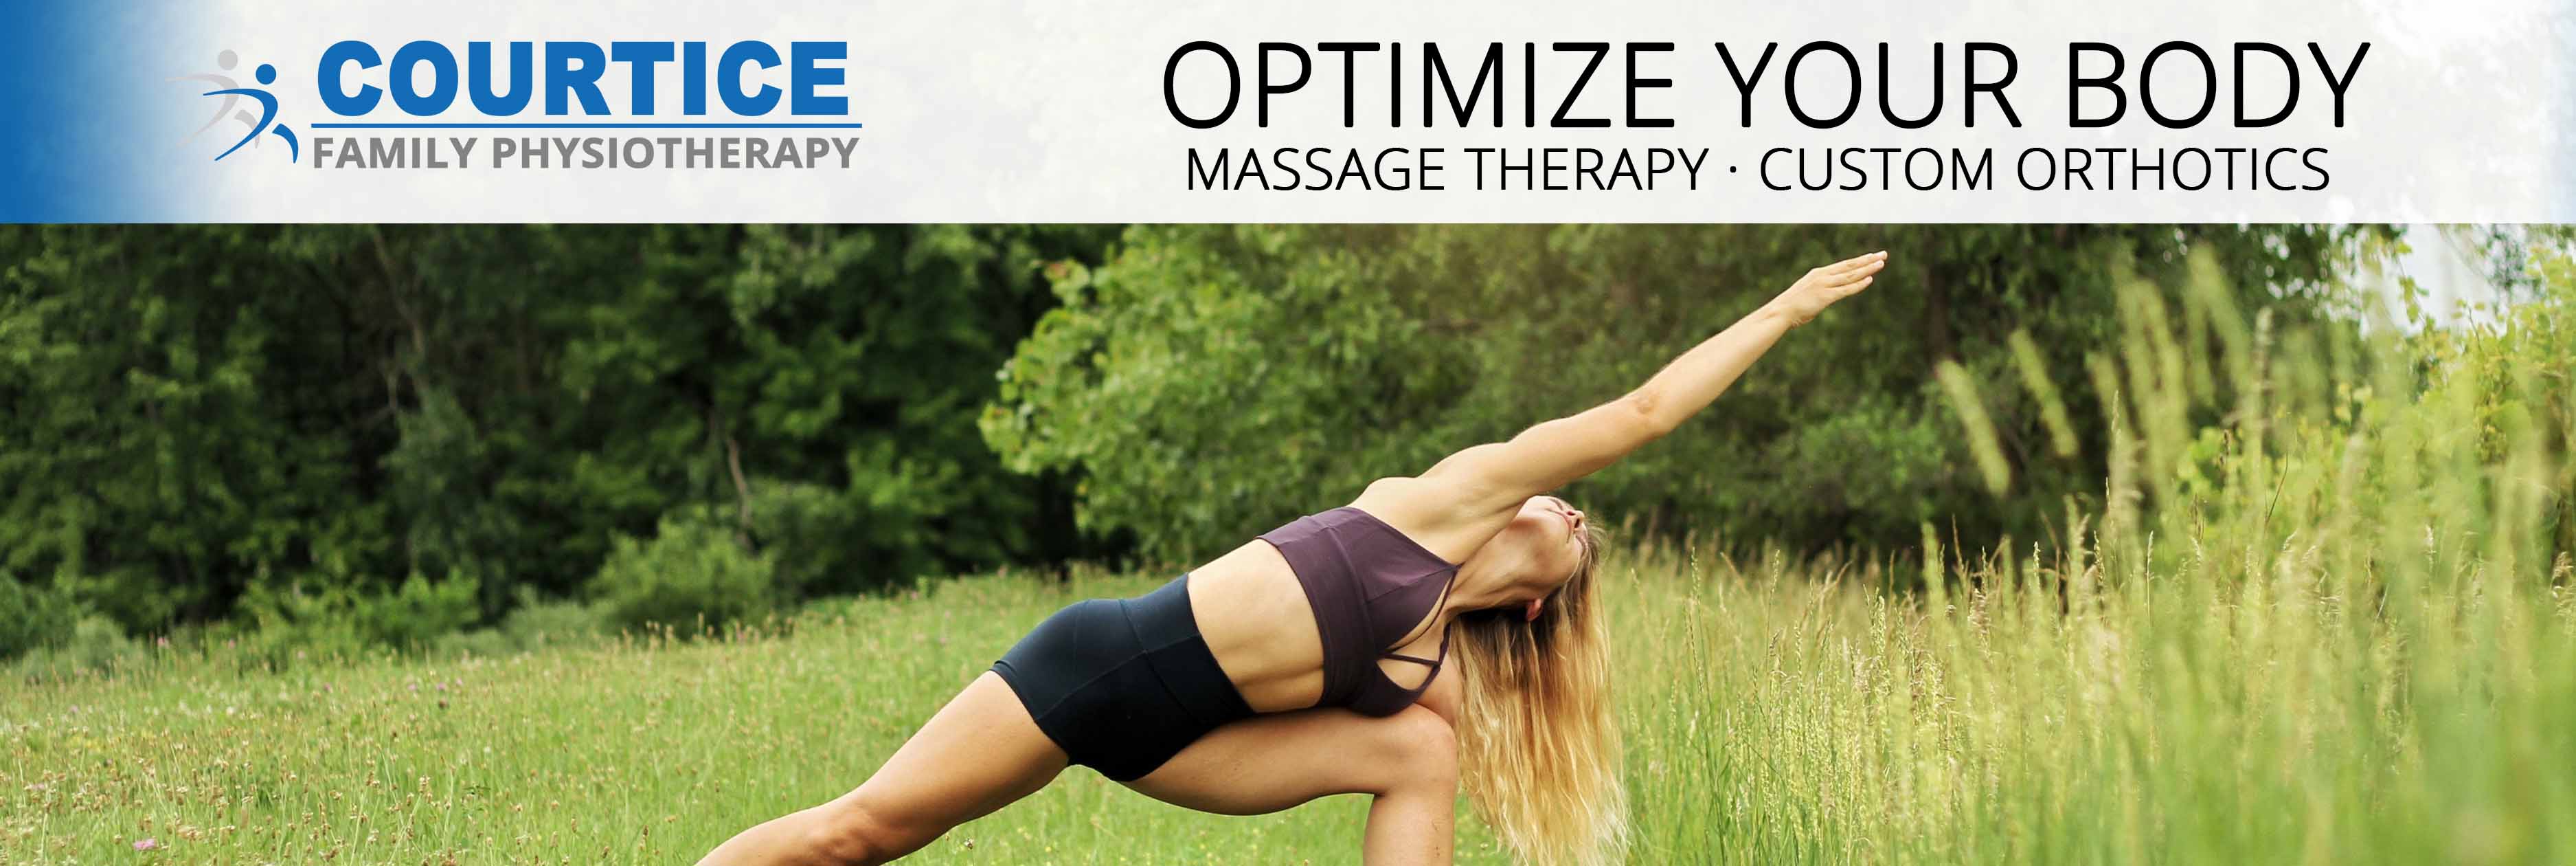 massage therapist rmt in courtice